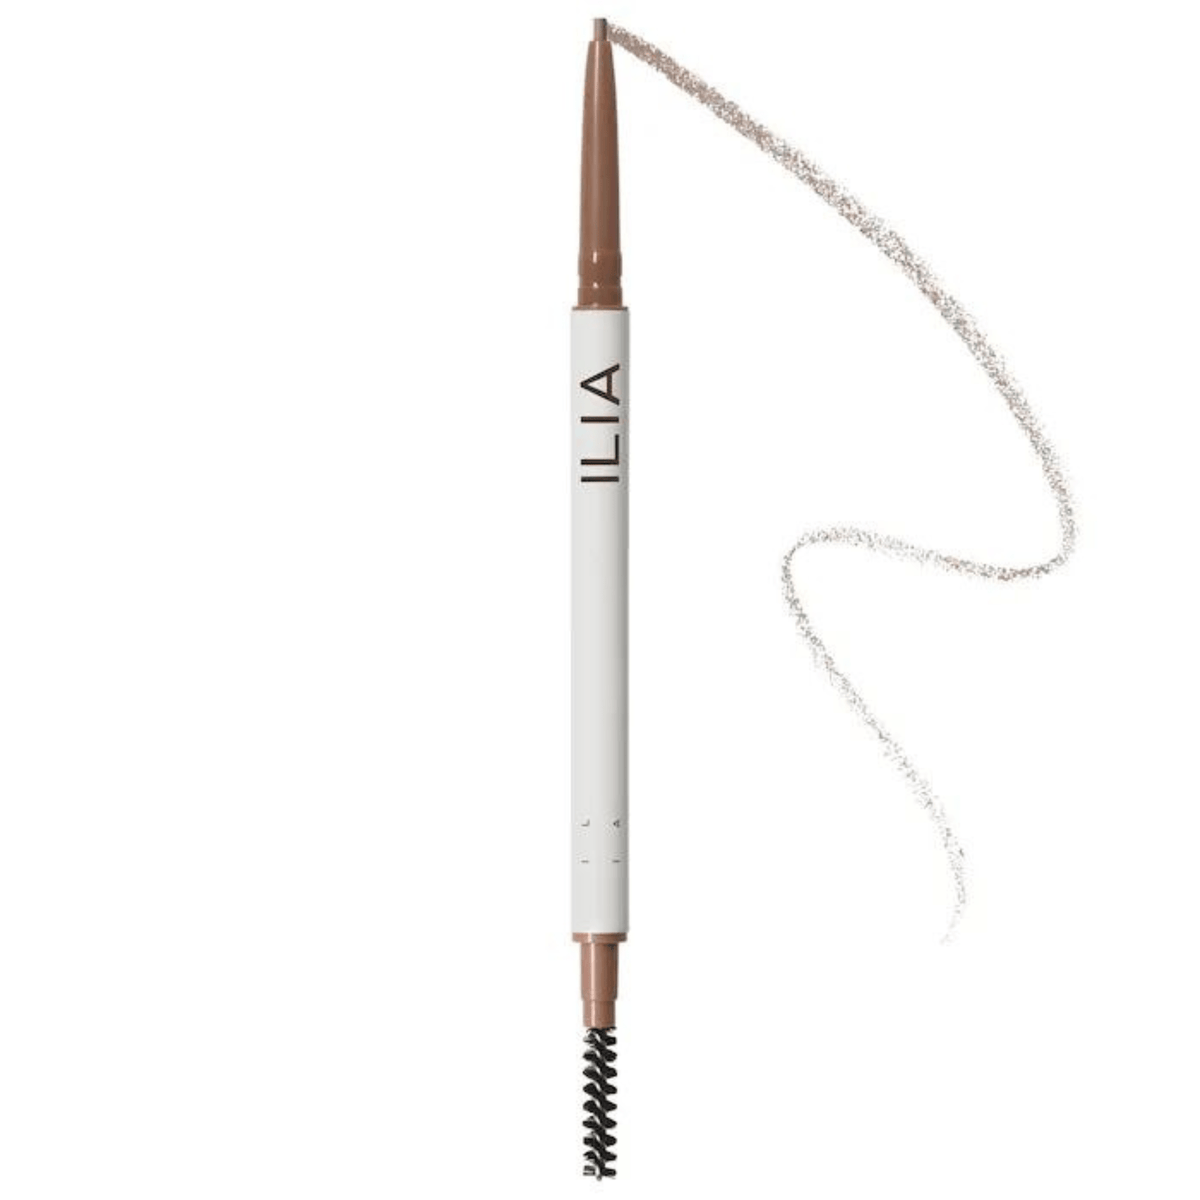 Primary Image of Brow Pencil - Blonde